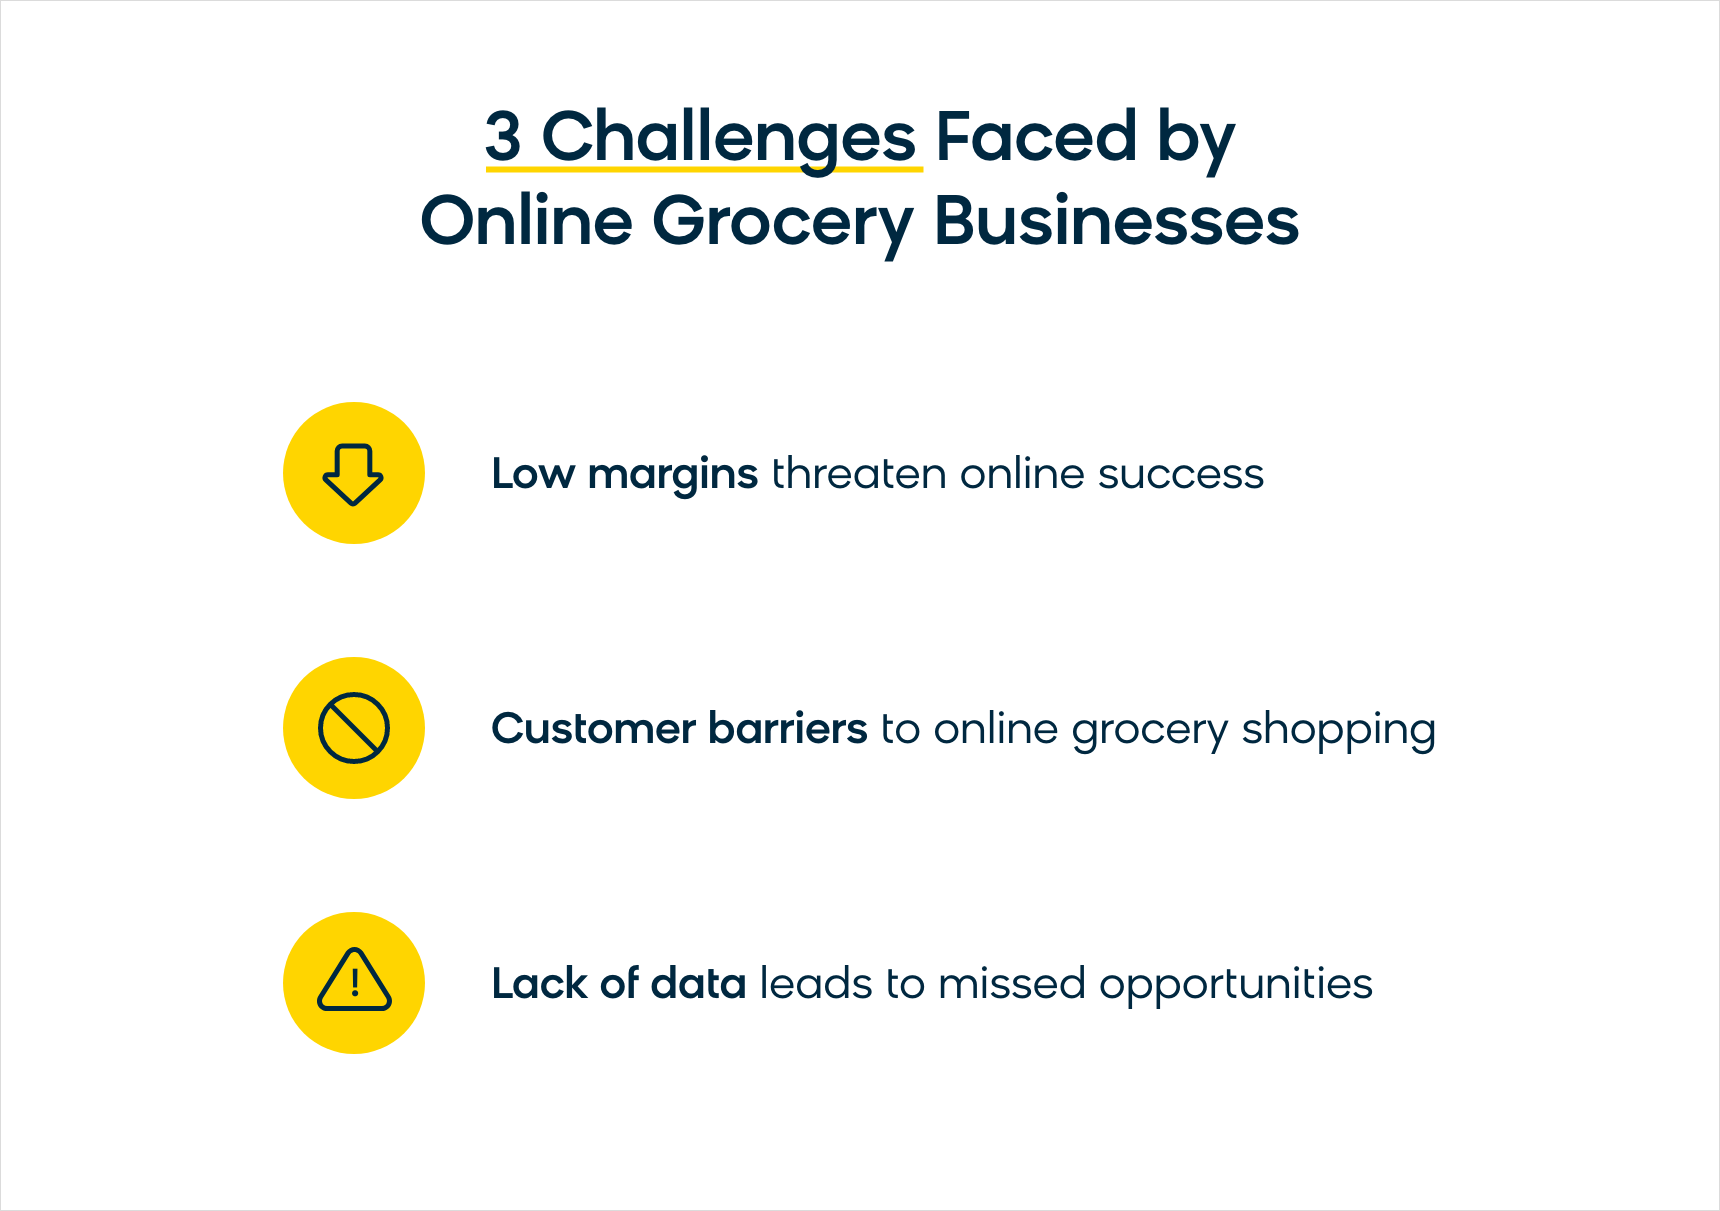 the three challenges facing online grocery businesses